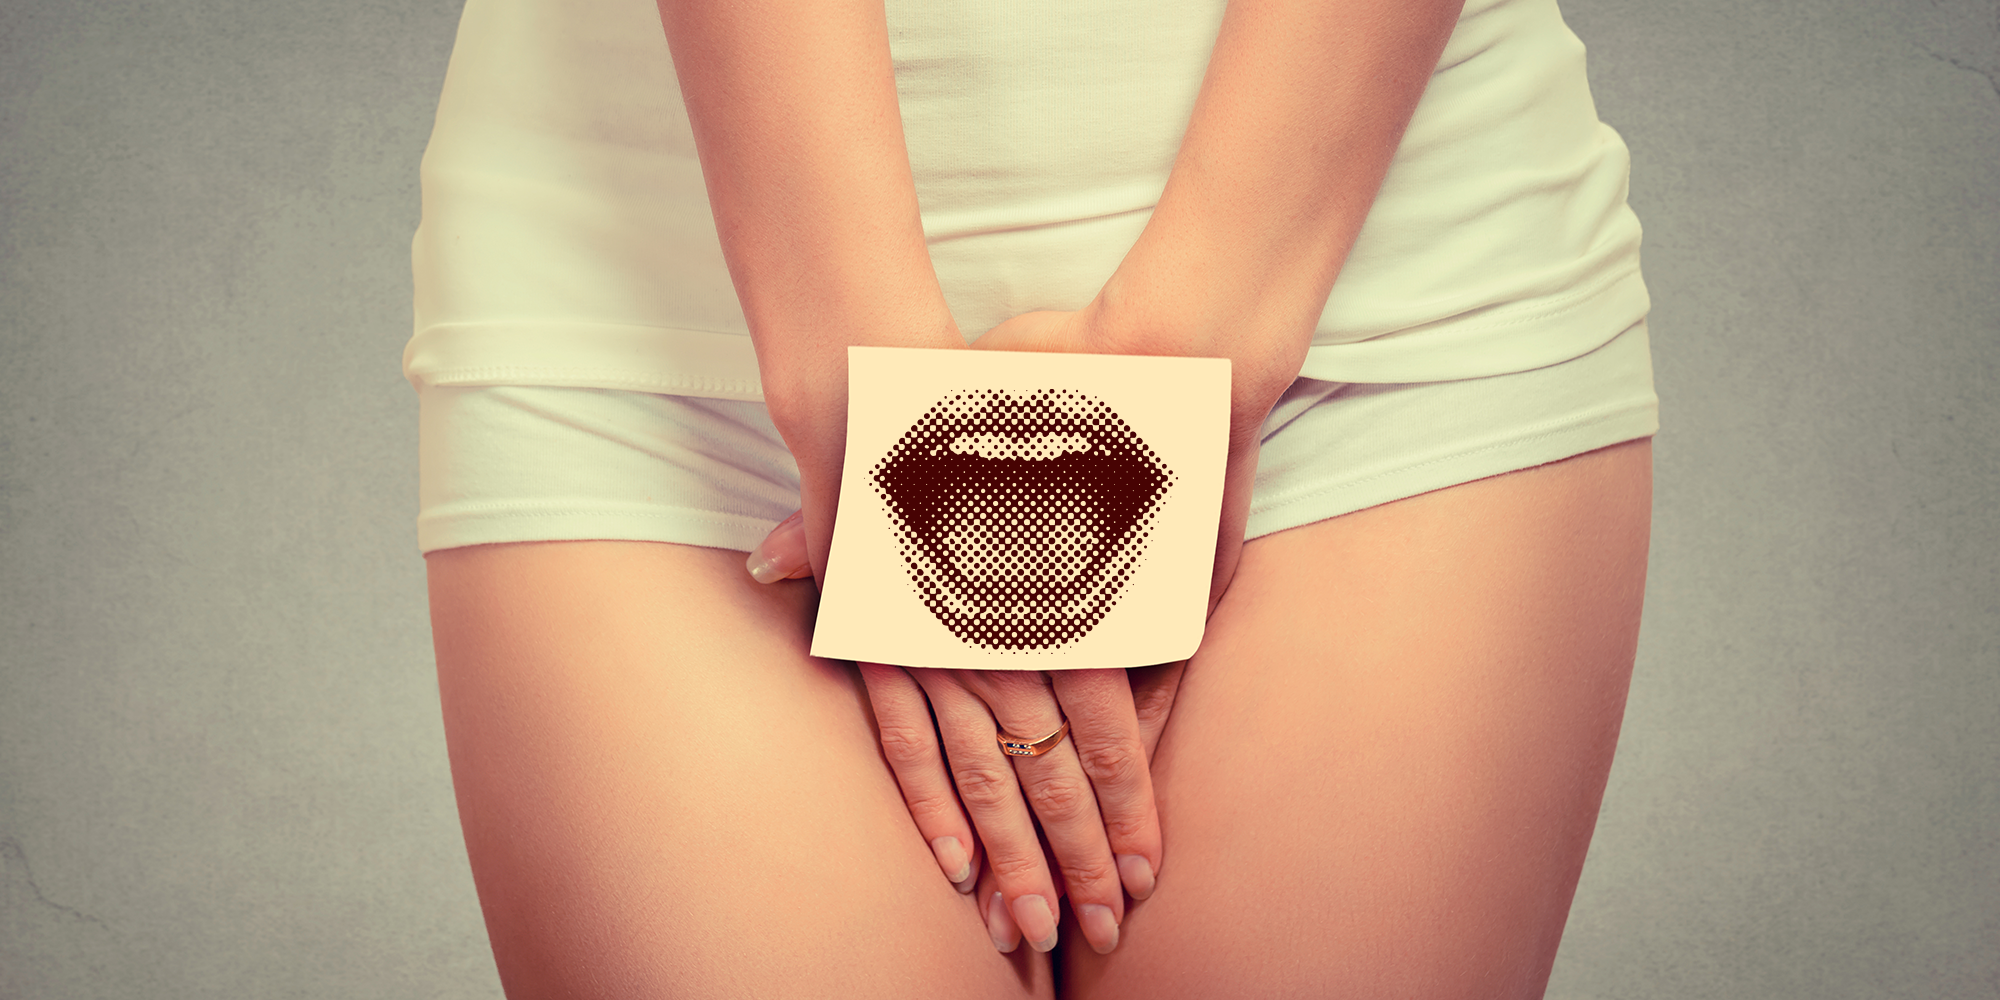 What Is a Dental Dam, and Do You *Really* Need to Use One?